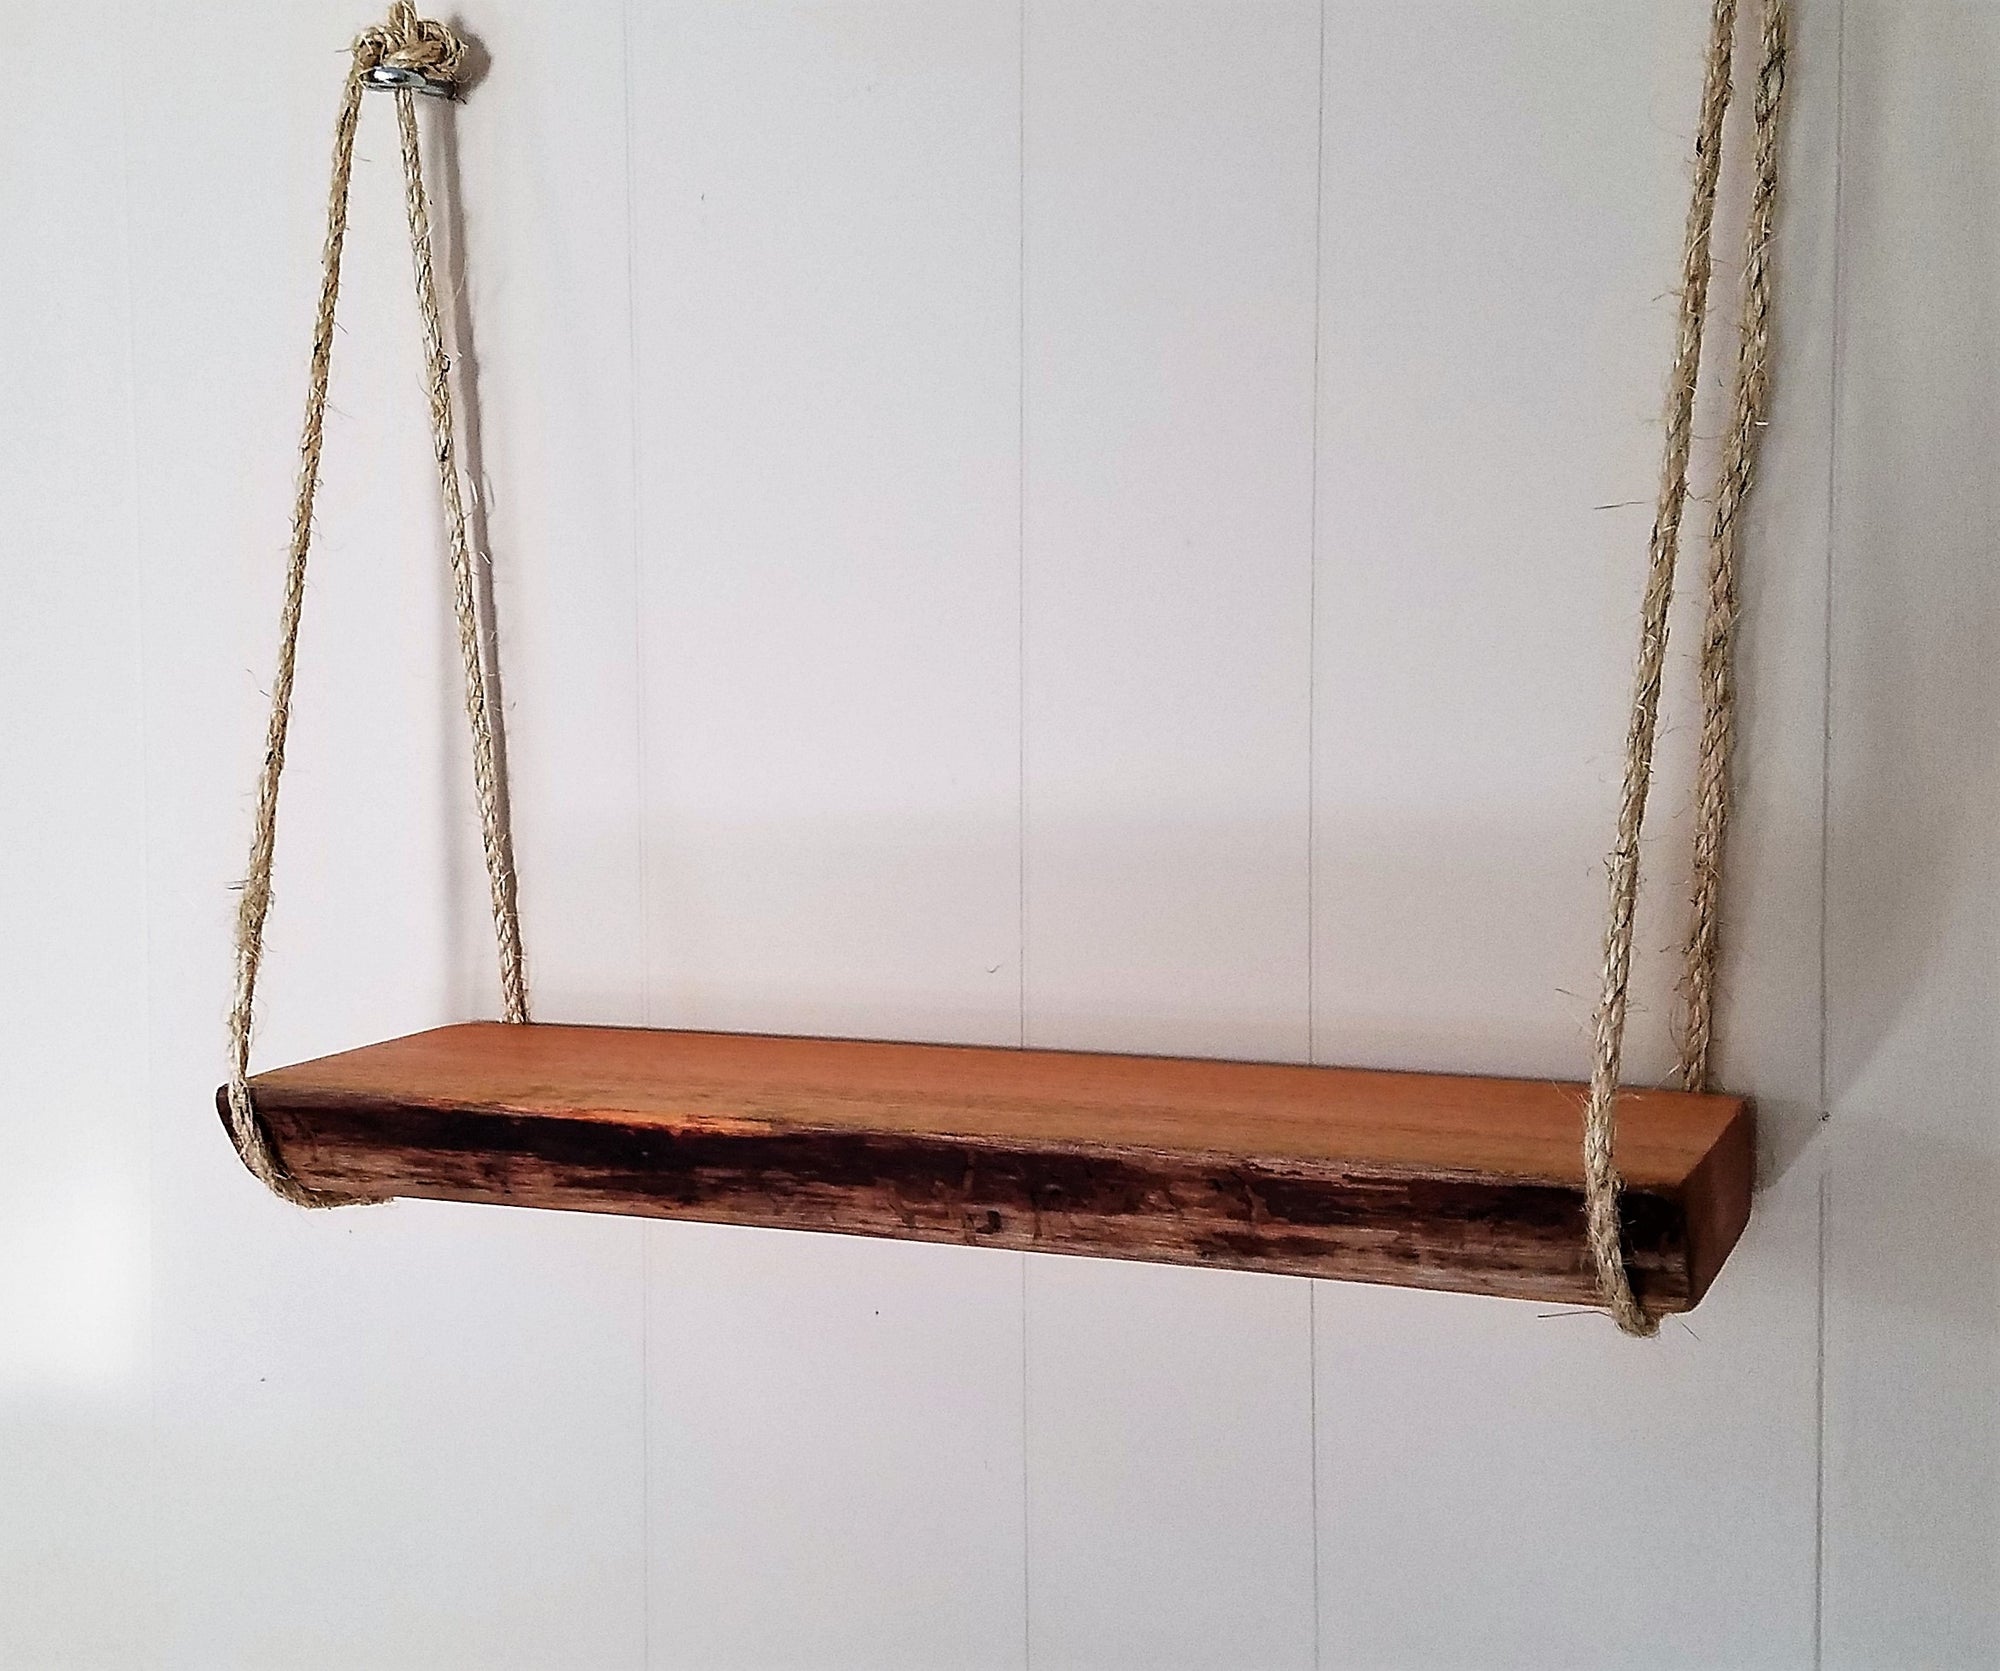 Buy Hand Crafted Reclaimed Wood Shelf, Rustic Shelf, Barnwood Shelves, Free Standing  Shelf, made to order from Deer Valley Woodworks